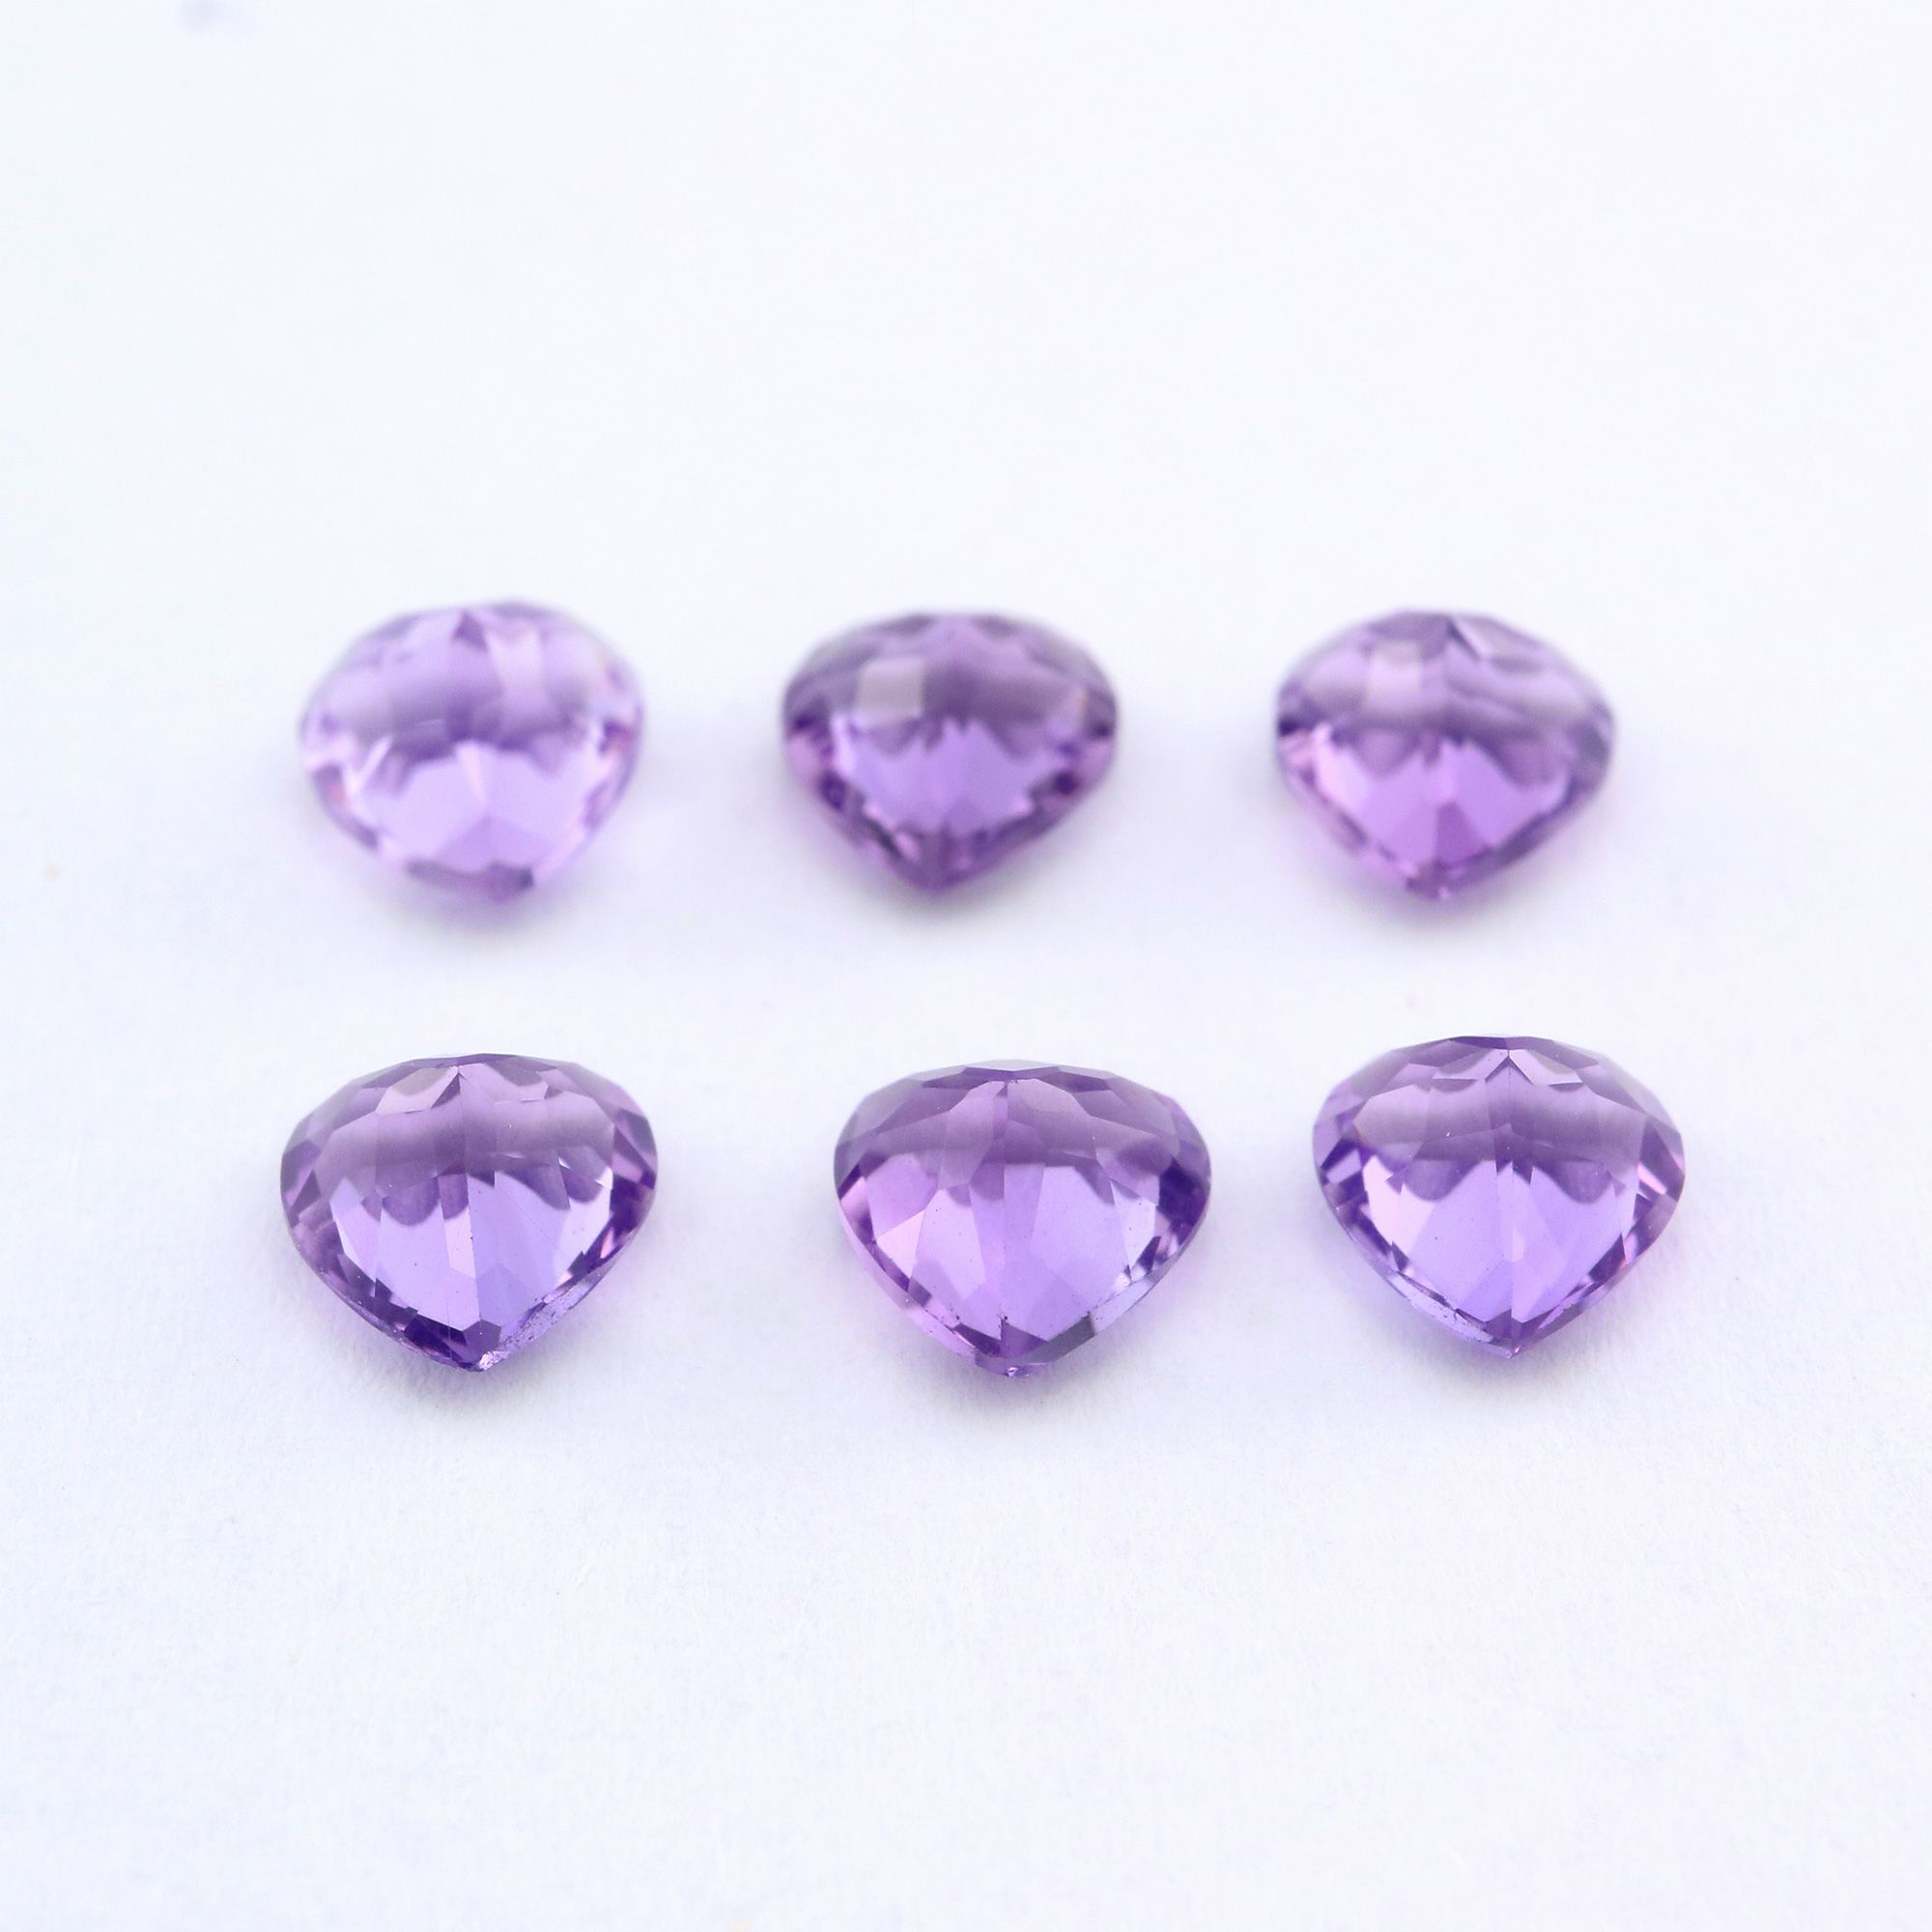 1Pcs Heart Purple Amethyst February Birthstone Faceted Cut Loose Gemstone Nature Semi Precious Stone DIY Jewelry Supplies 4130015 - Click Image to Close